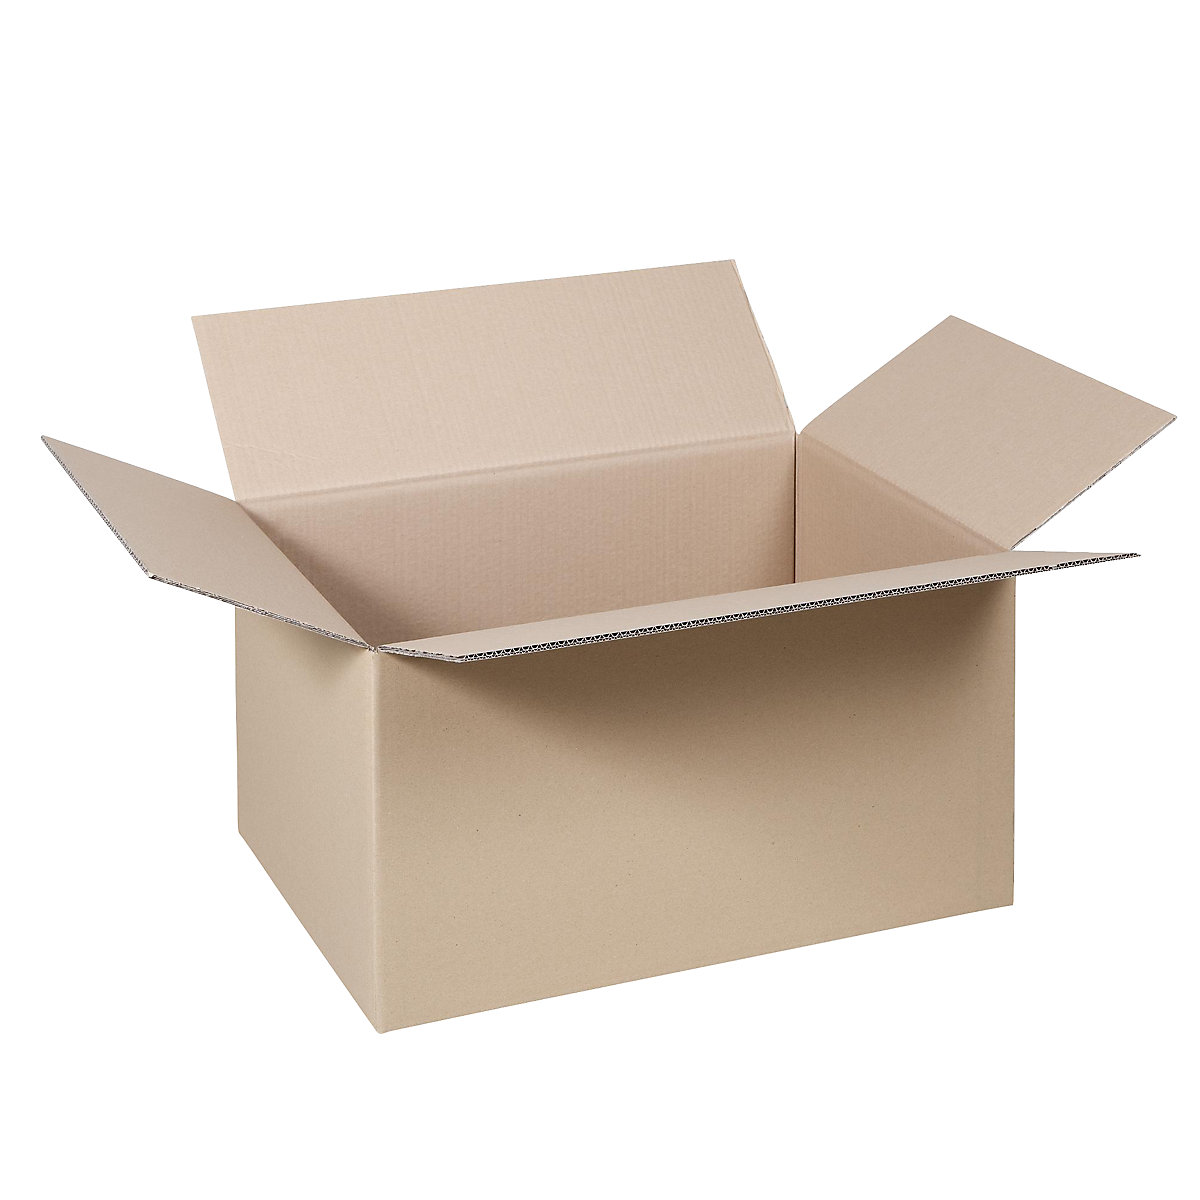 Folding cardboard box, FEFCO 0201, made of double fluted cardboard, internal dimensions 400 x 325 x 273 mm, pack of 100-39